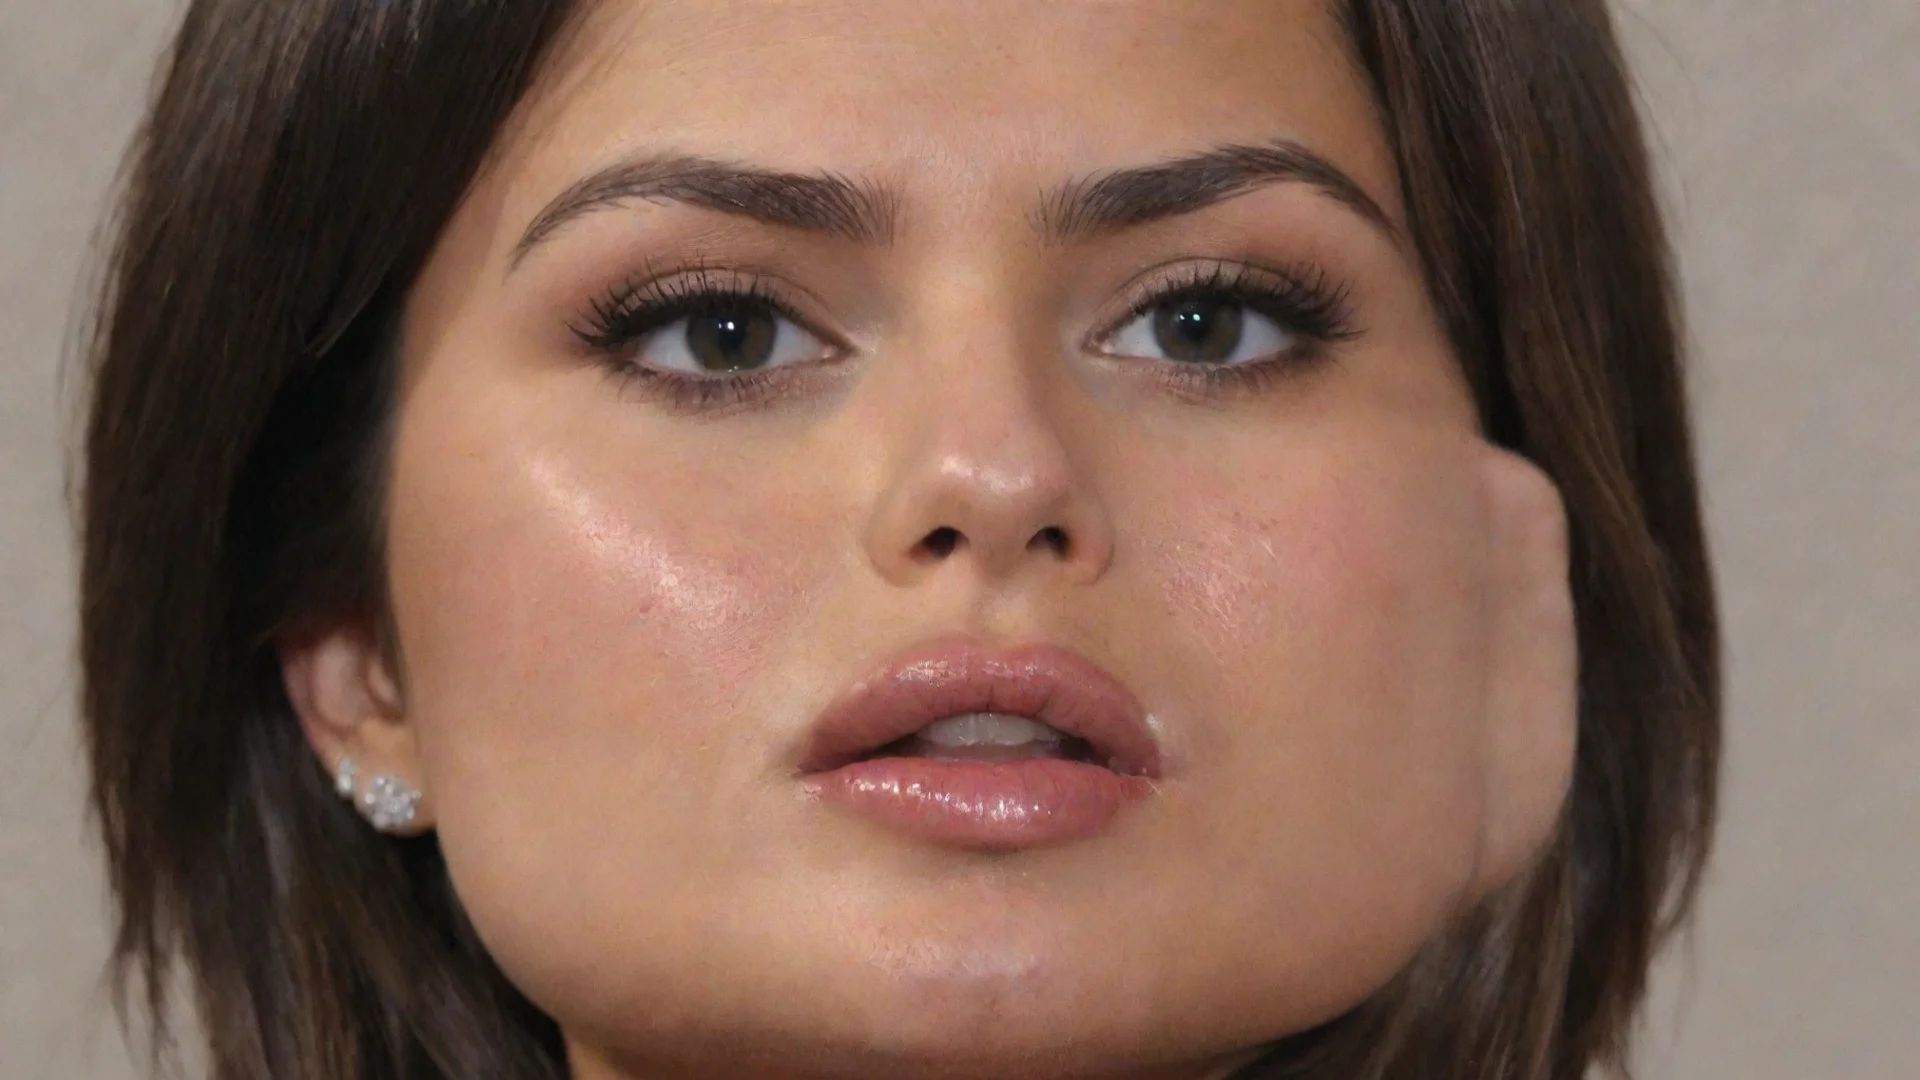 aiamazing selena gomez %252c sperm in her face  awesome portrait 2 wide